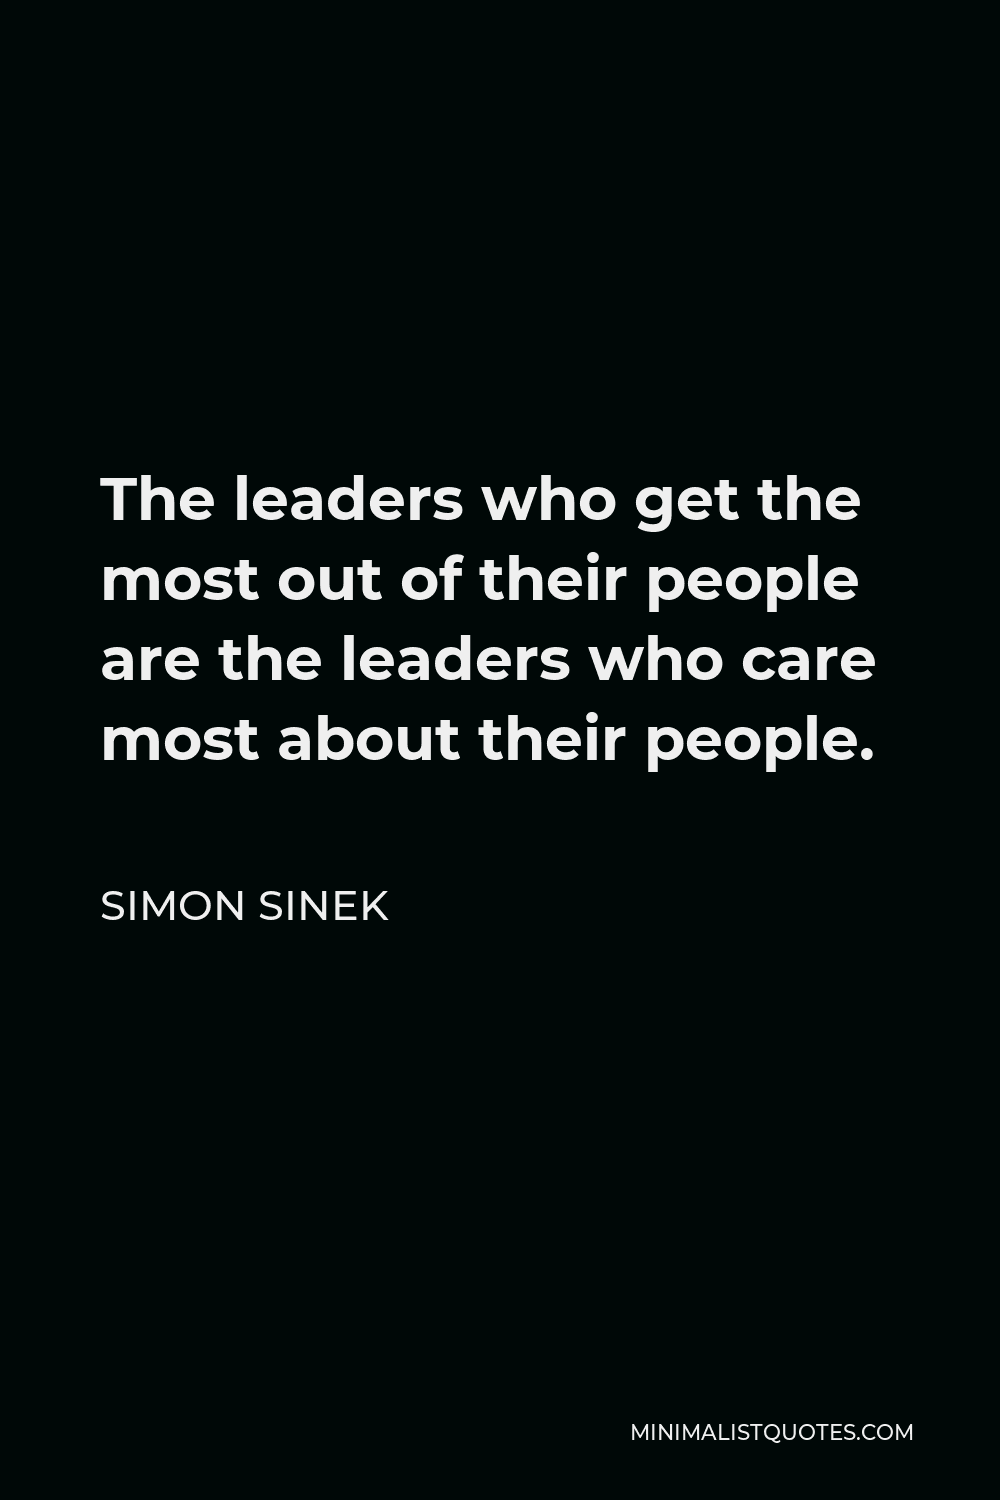 Simon Sinek Quote - The leaders who get the most out of their people are the leaders who care most about their people.